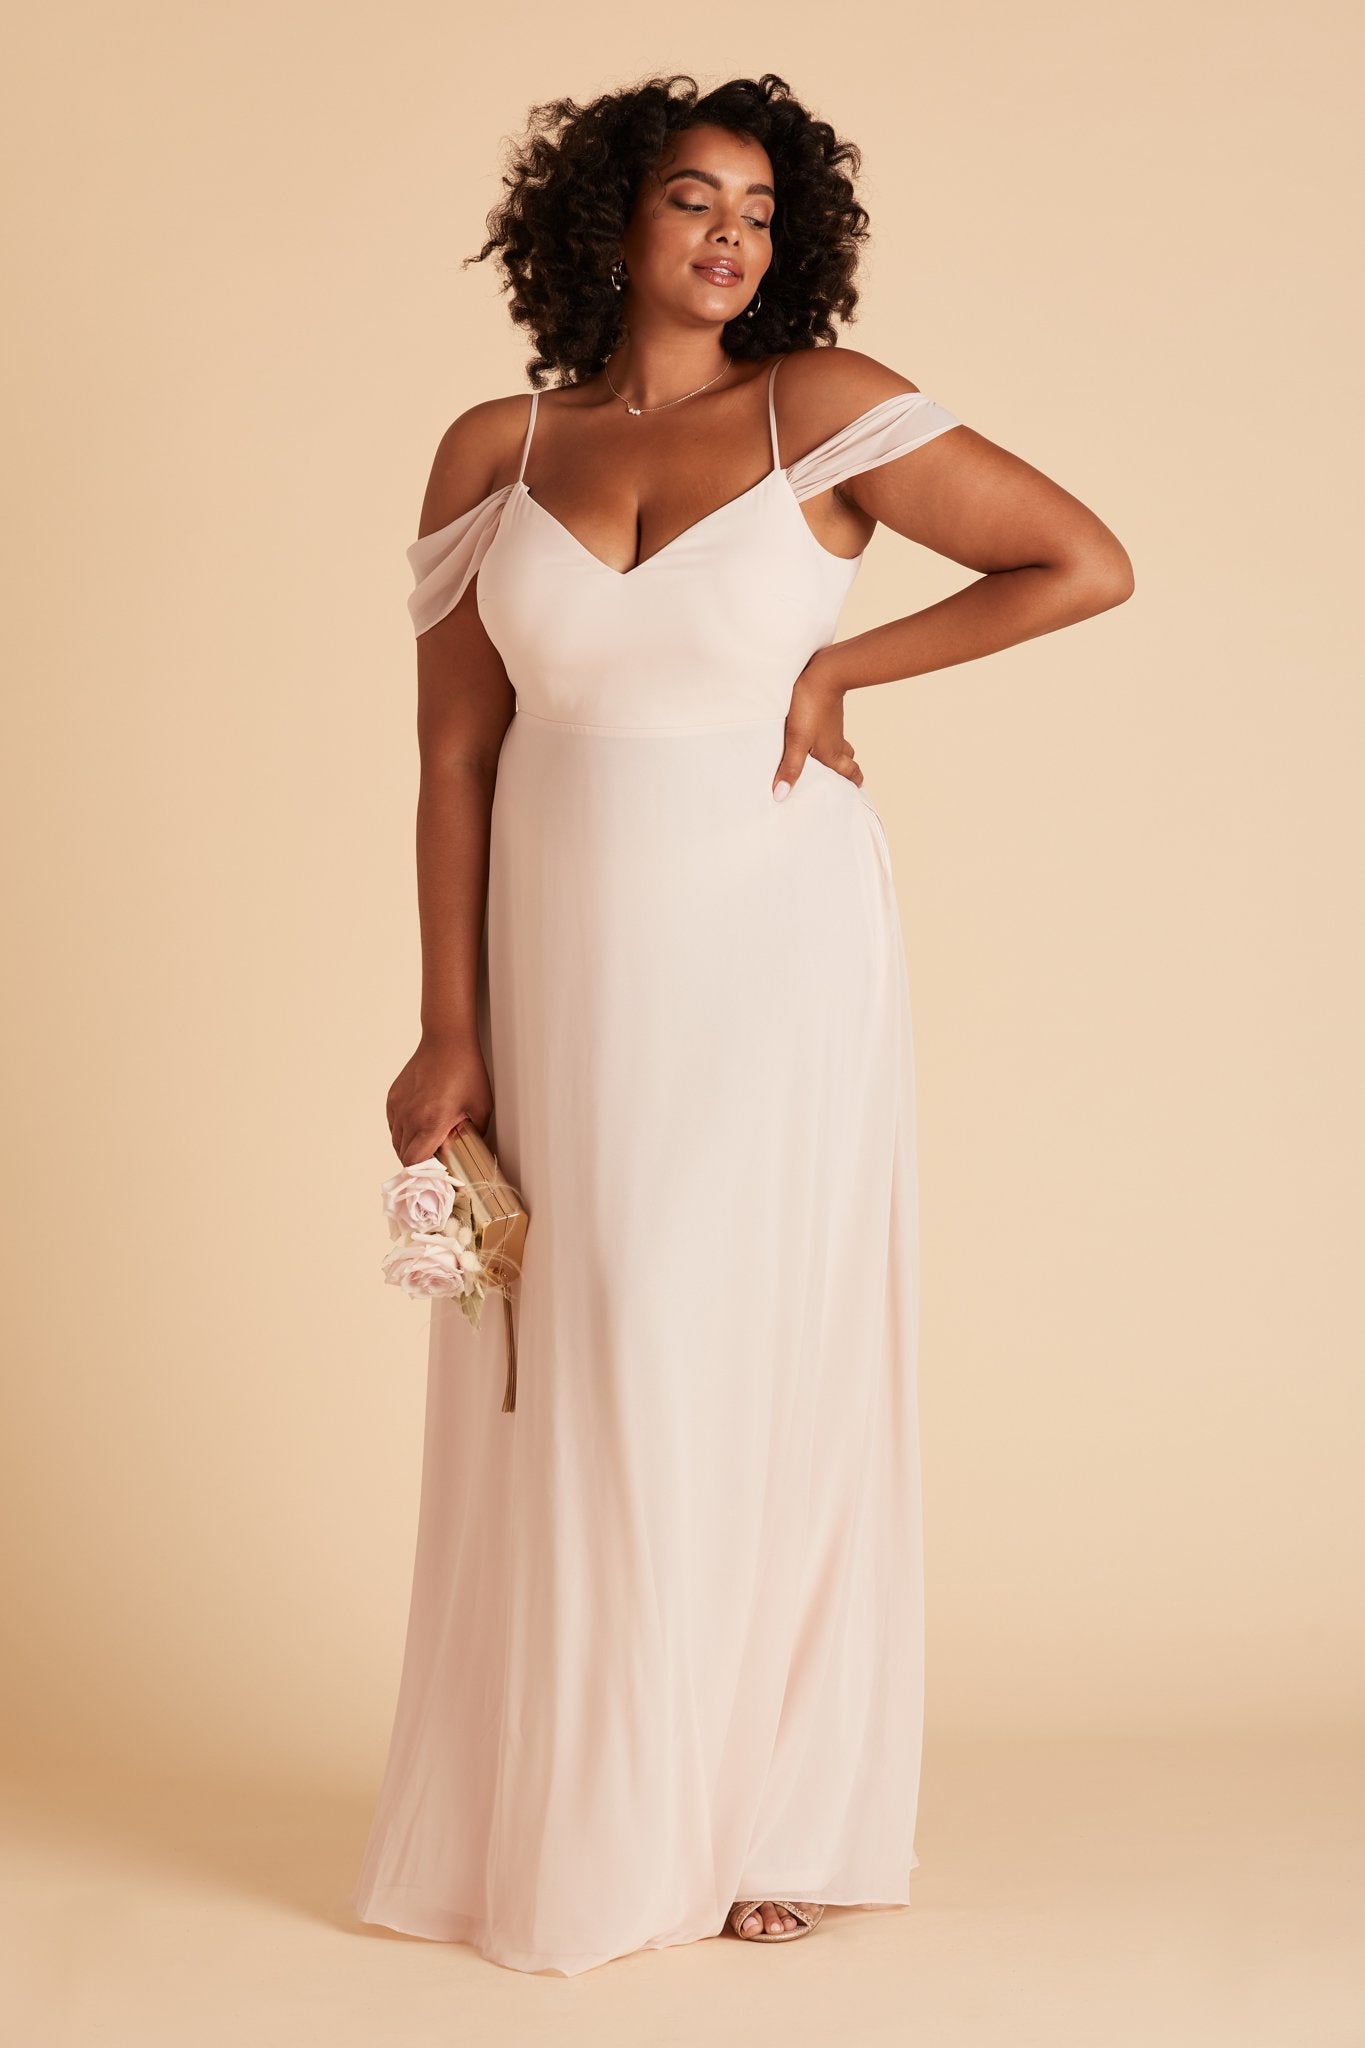 Devin convertible plus size bridesmaids dress in pale blush chiffon by Birdy Grey, front view